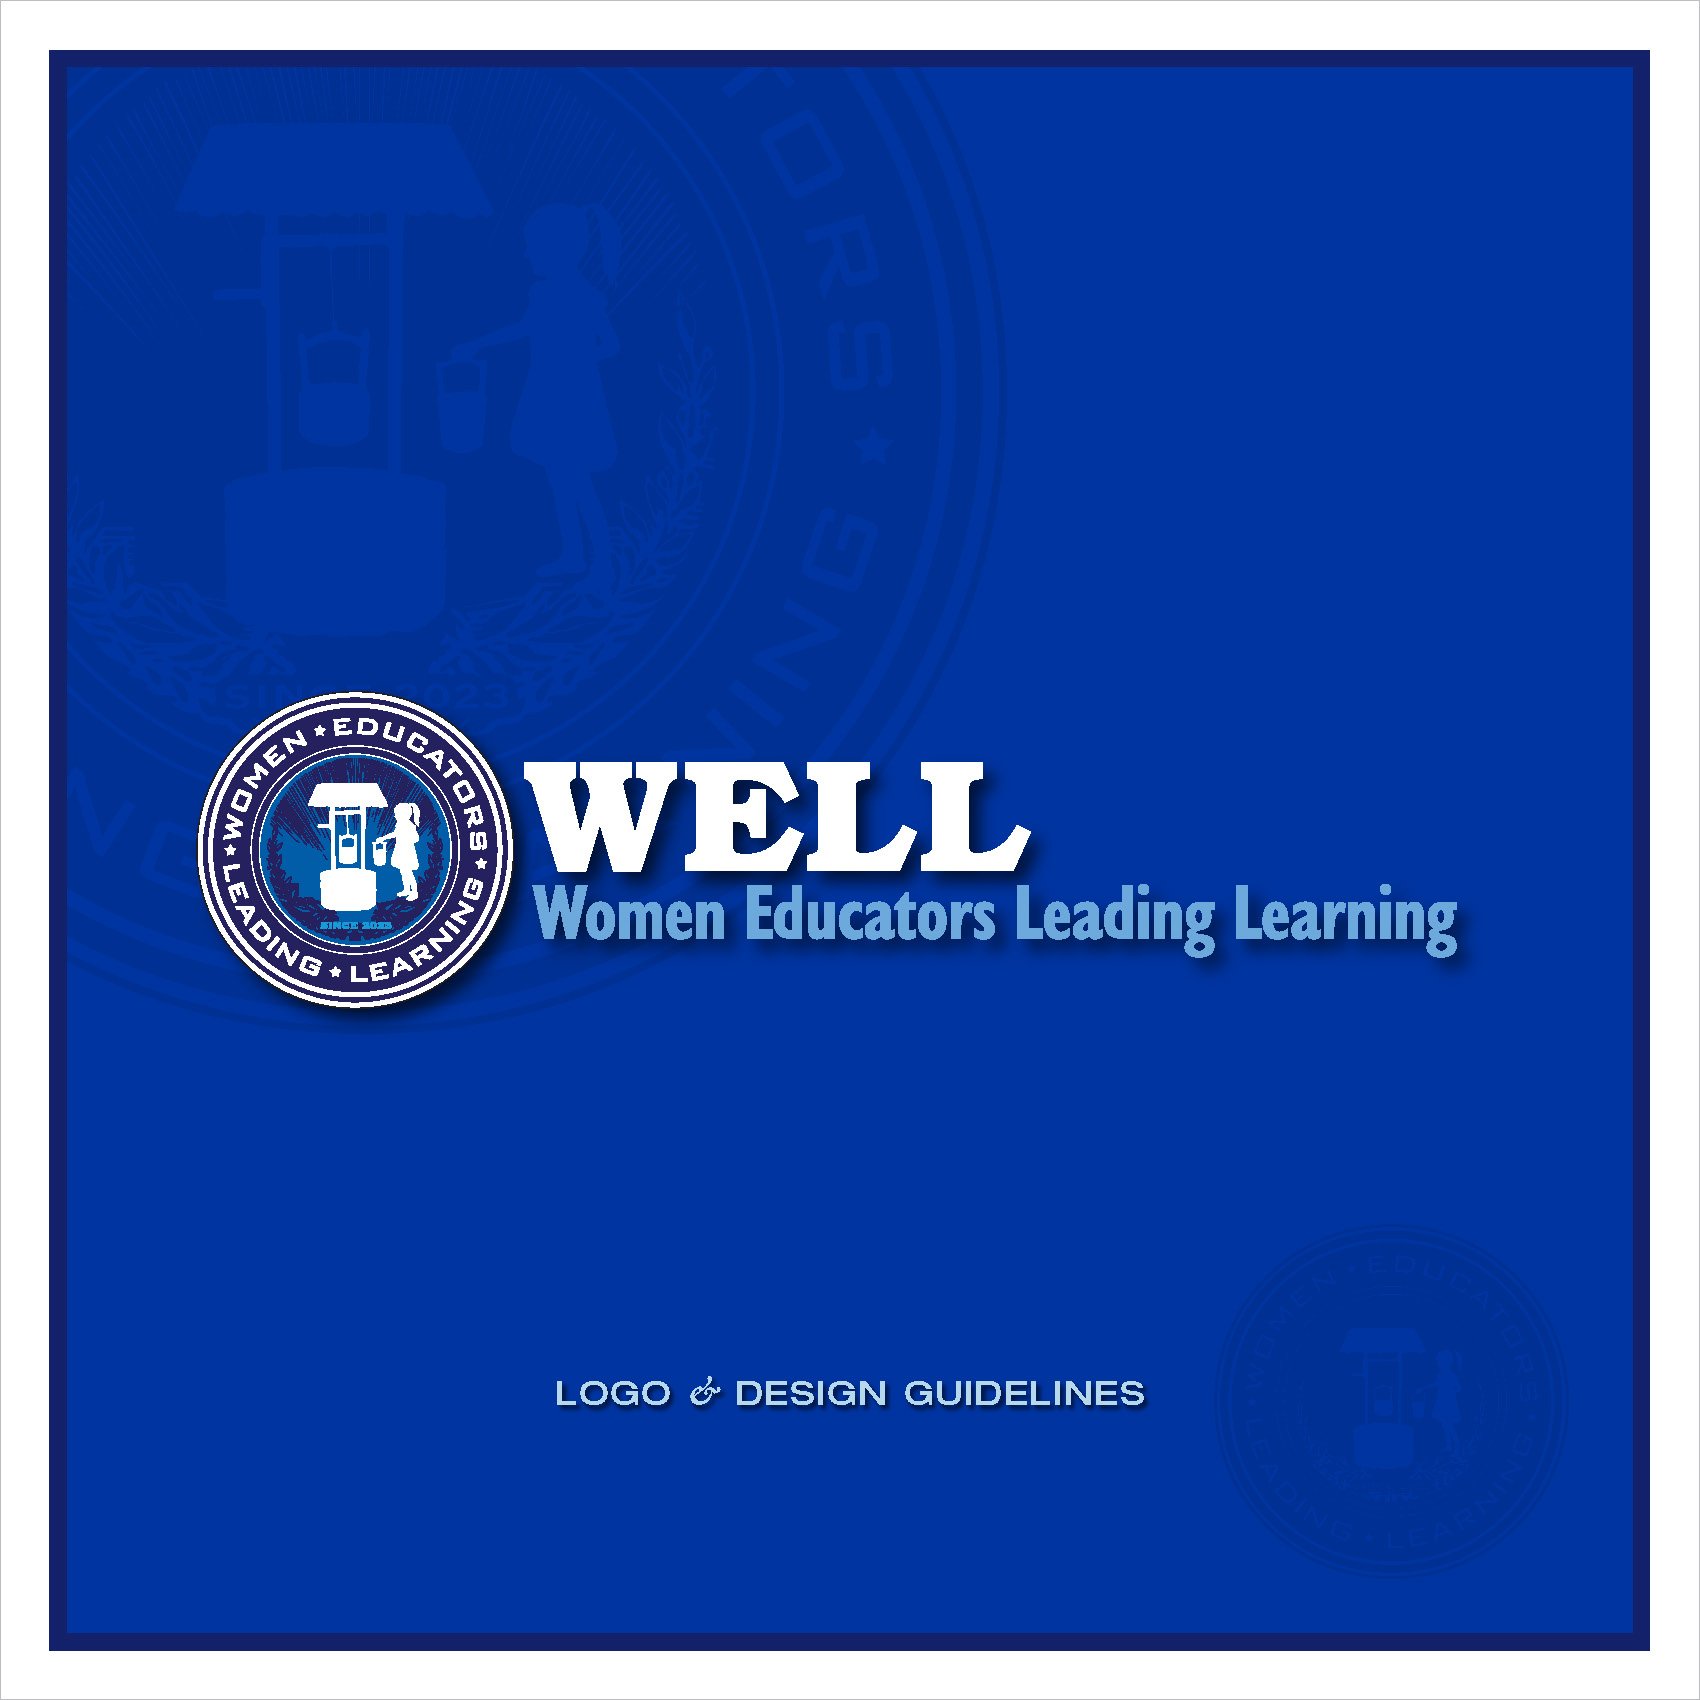 Logo and Visual Identity -- designed and illustrated by SP STUDIOS, for WELL - Women Educators Leading Learning, New England.